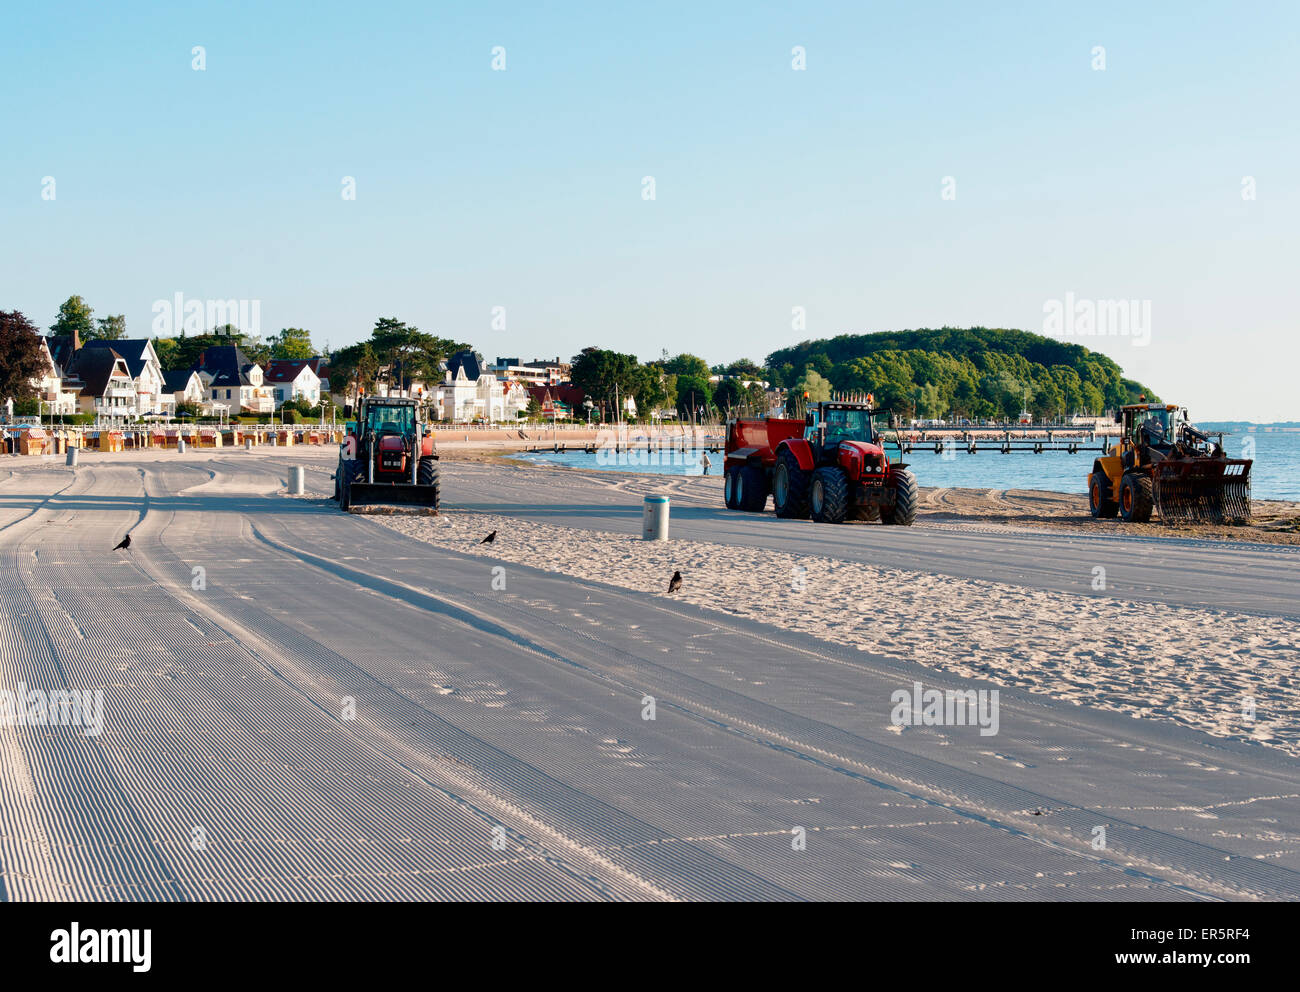 Tractors cleaning the beach, Travemuende, Luebeck, Schleswig-Holstein, Germany Stock Photo